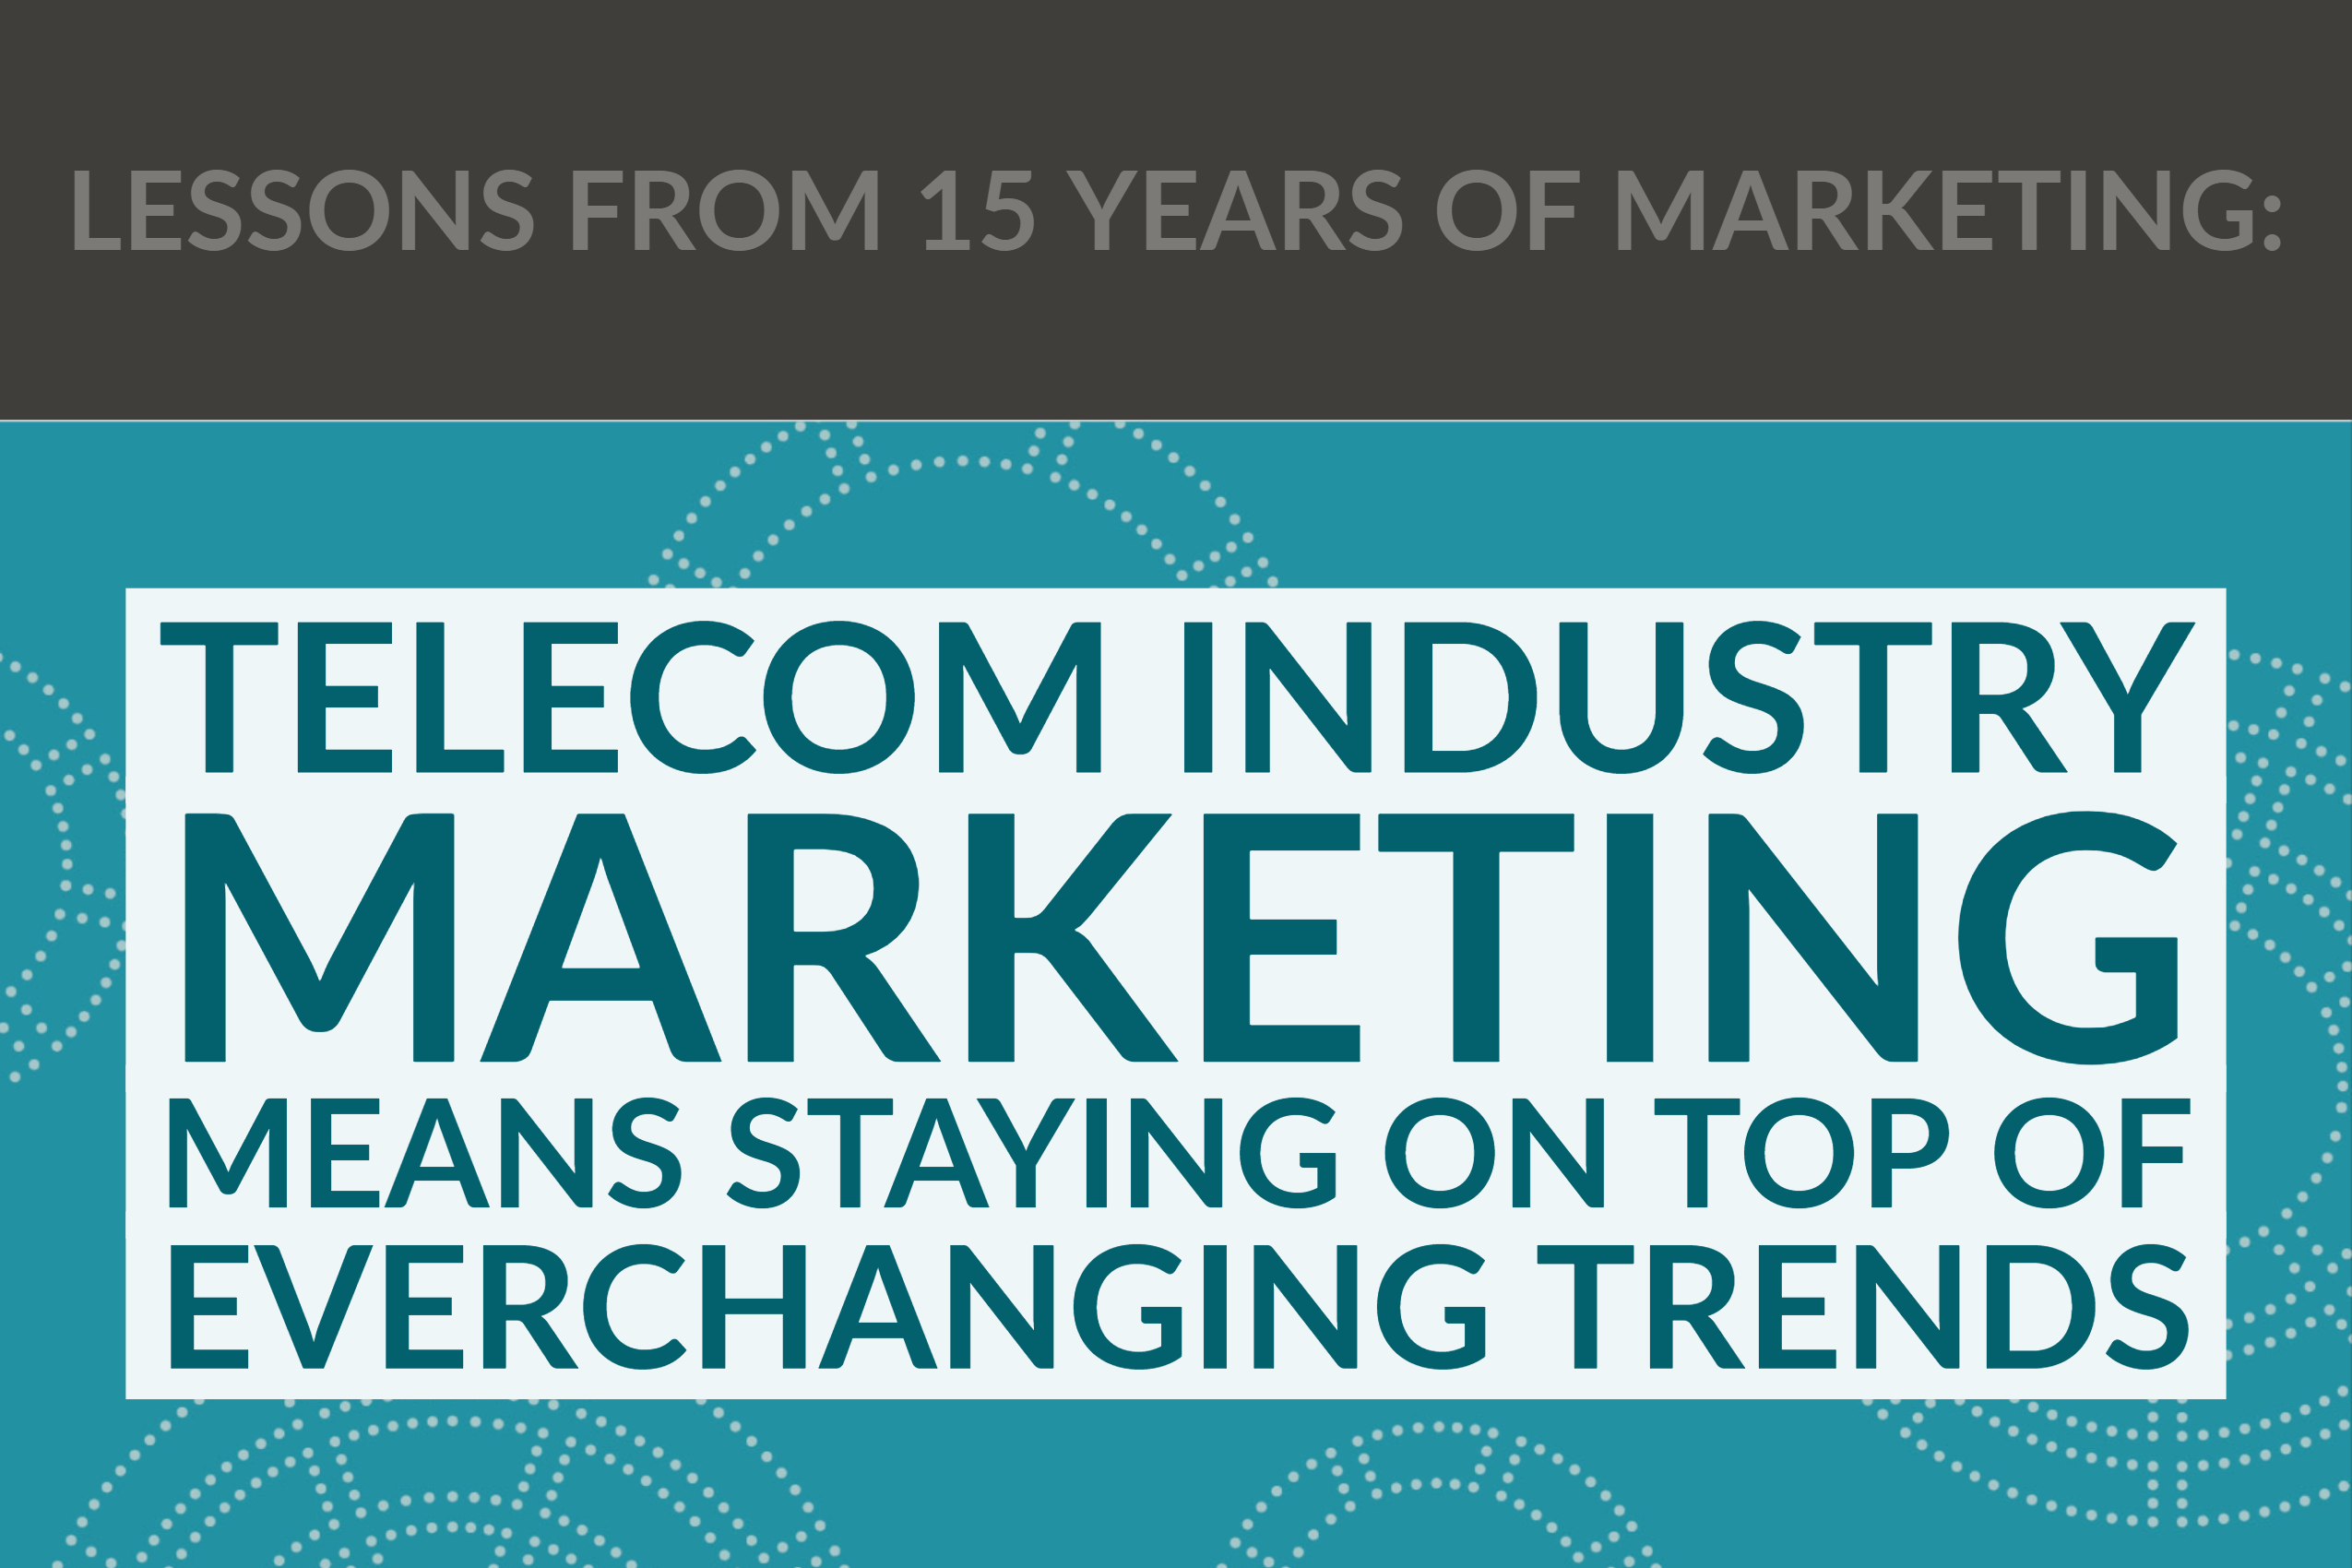 Lessons From 15 Years: Telecom Industry Marketing Means Staying On Top Of Everchanging Trends